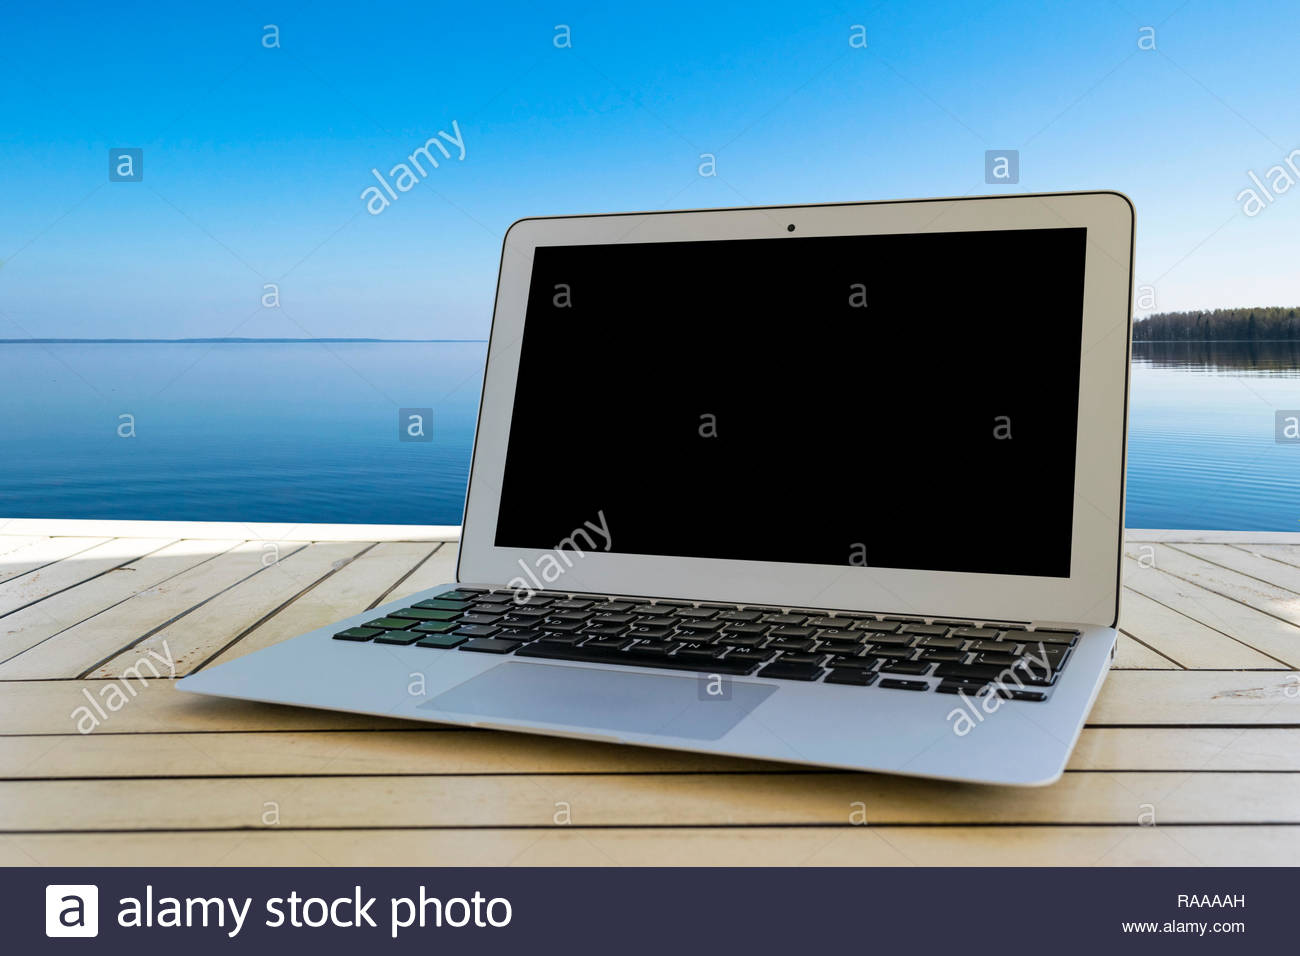 Laptop Puter On Wooden Table Front Ocean Tropical Island